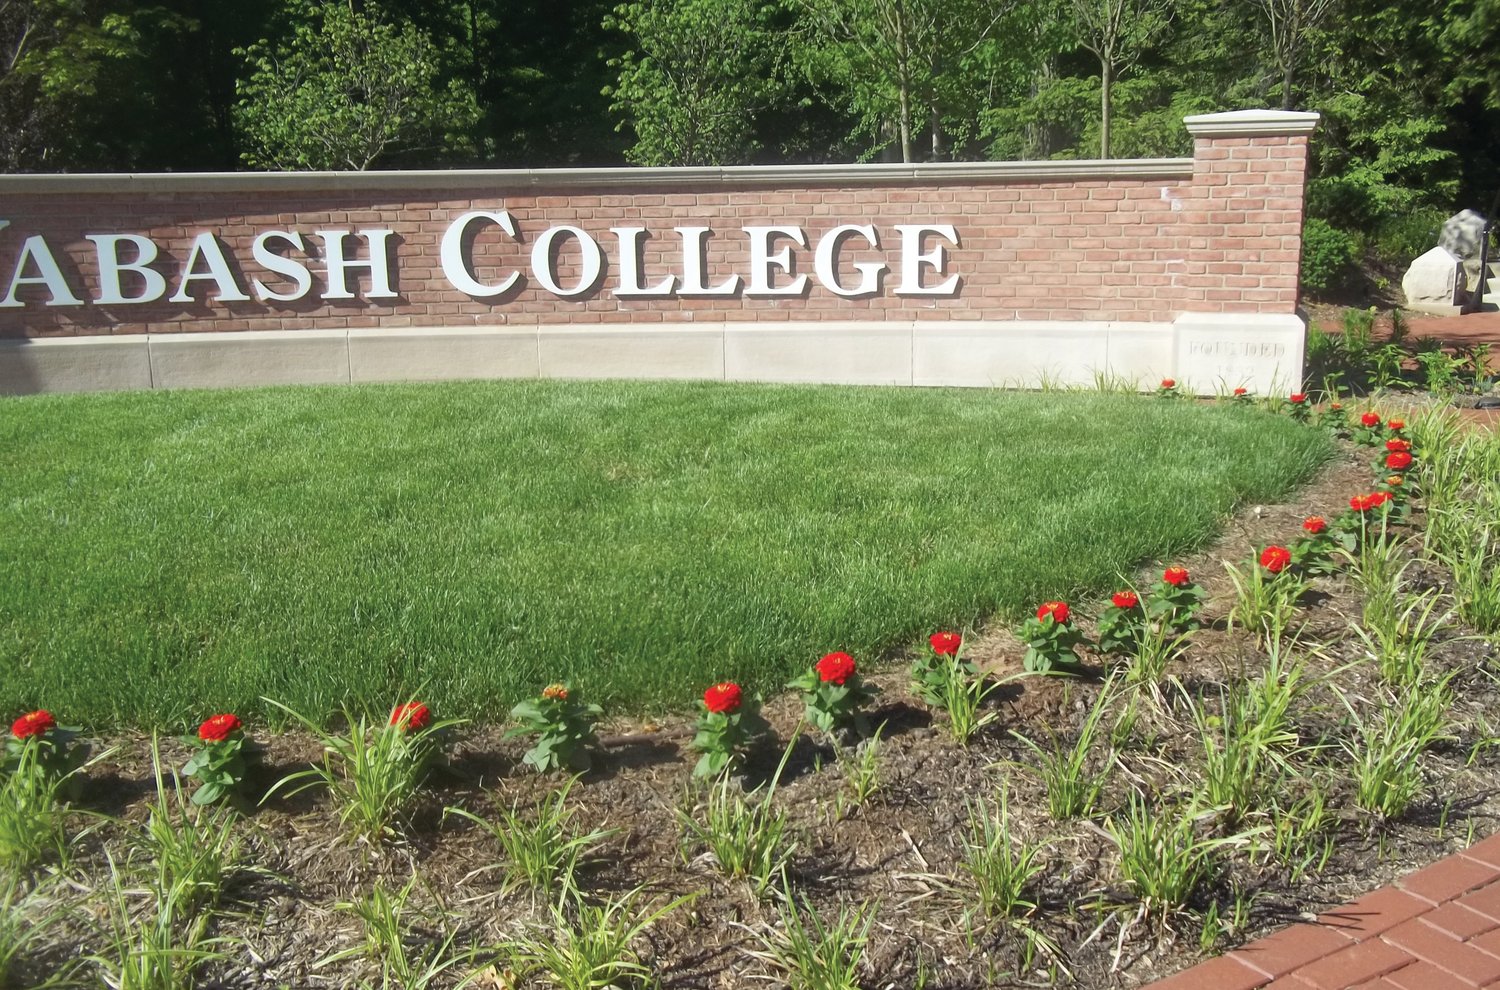 The Flower Lovers Club of Crawfordsville recognized Wabash College as its June Garden of the Month.